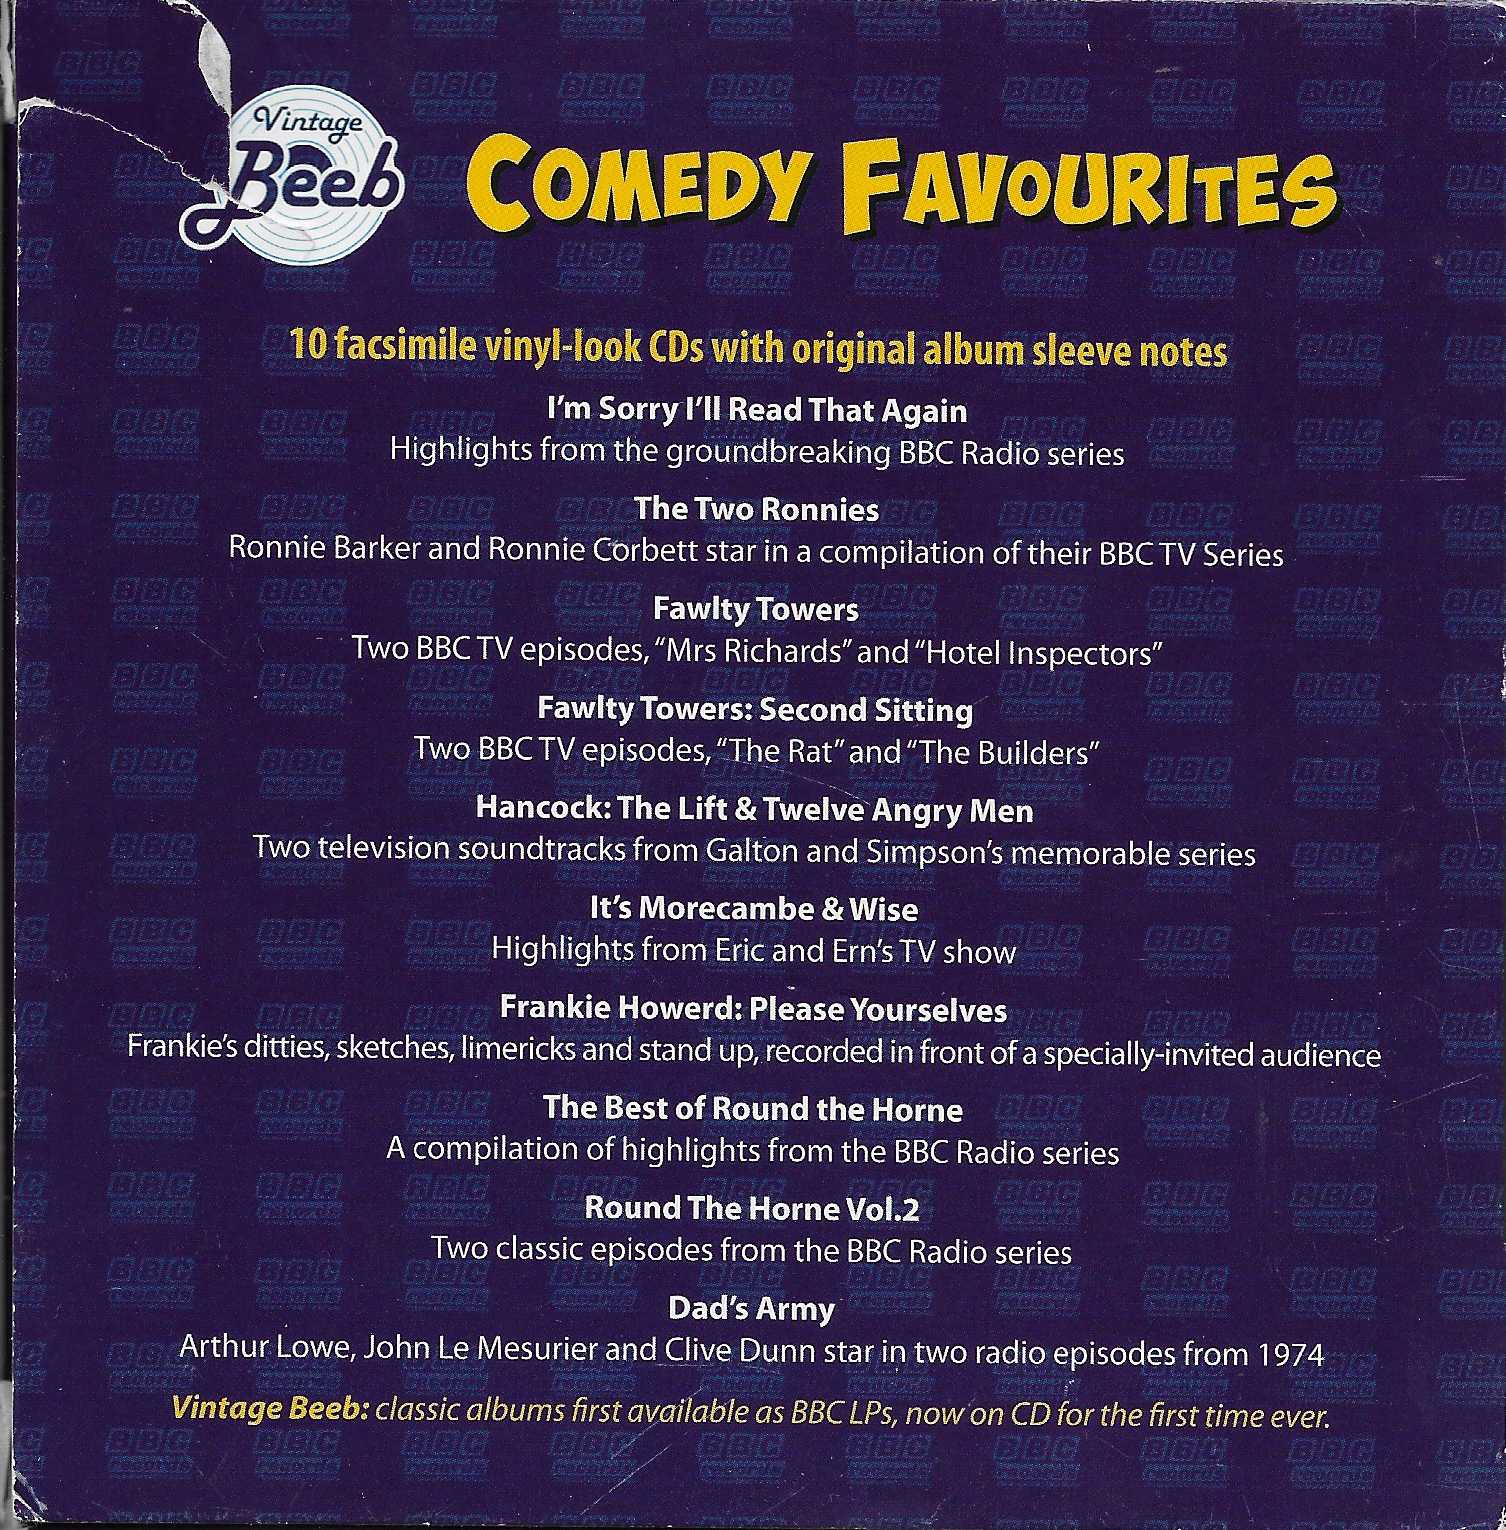 Picture of ISBN 978-1-4458-6151-7 Vintage Beeb - Comedy favourites by artist Various from the BBC records and Tapes library